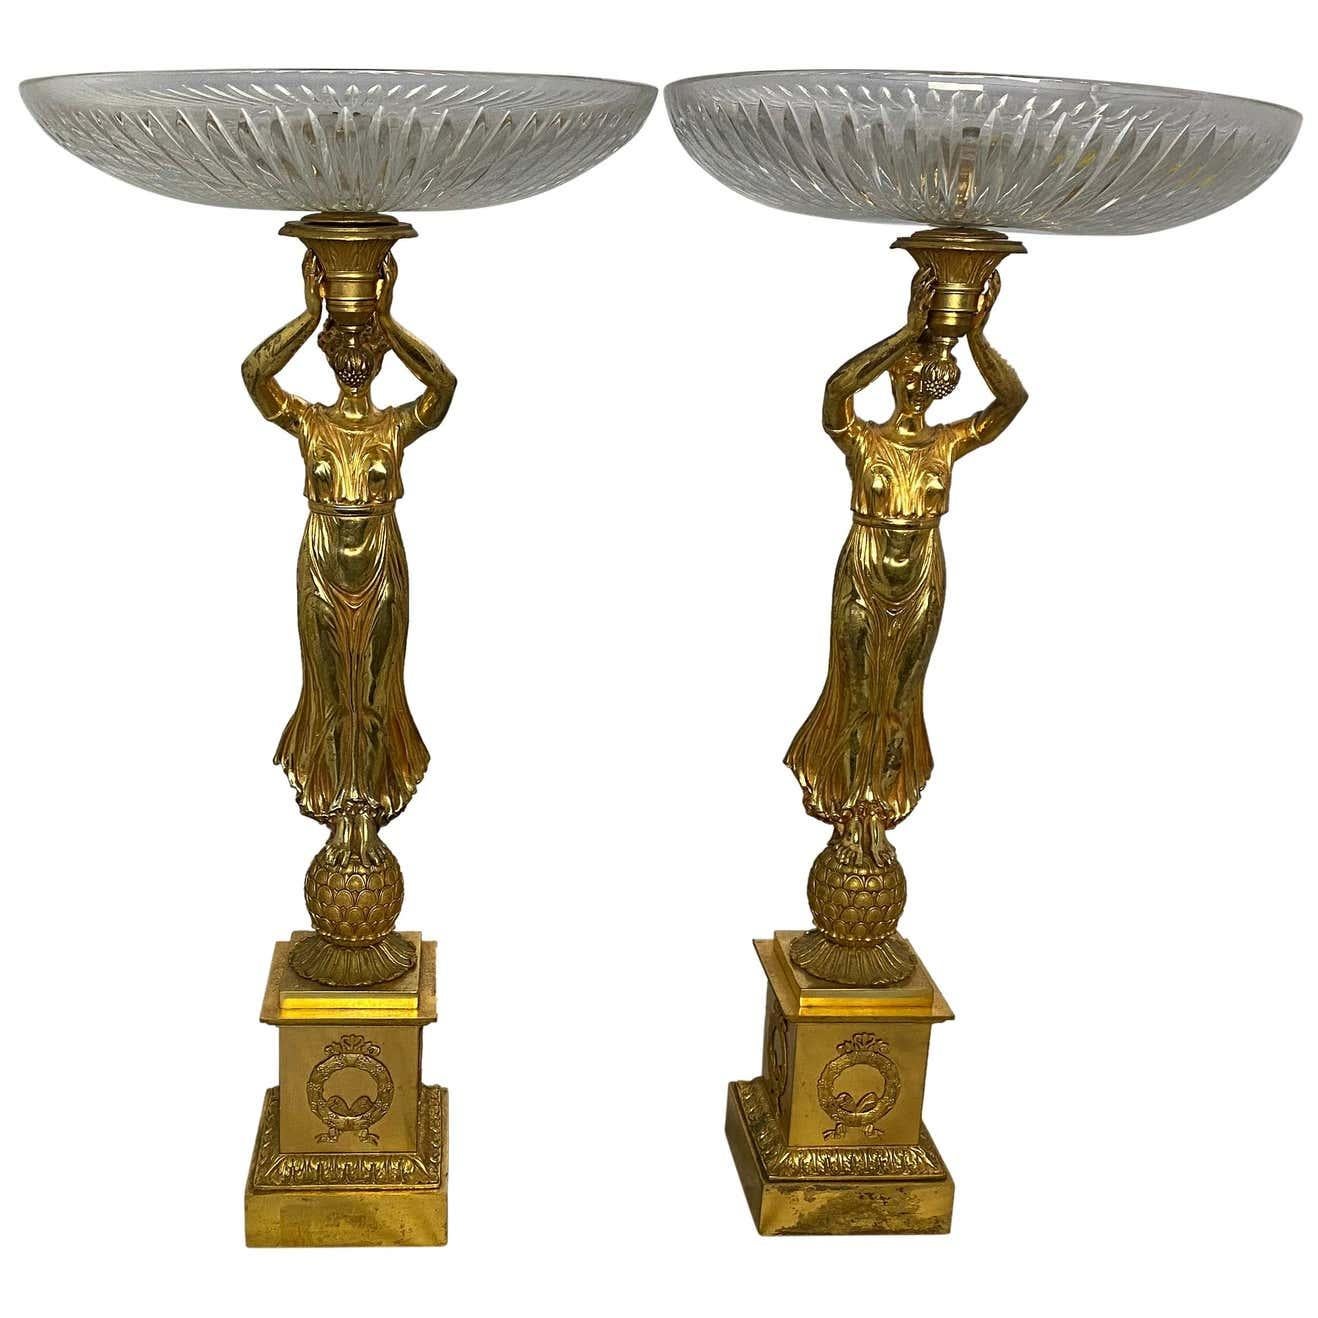 A pair of allegorical French Tazzas with cut crystal bowls suspended by Aphrodite figurative ladies, and standing on pedestal bases with detailed Empire ormolu wreaths on the walls of the plinths. Perfect for holding fruit or sweets. 20th